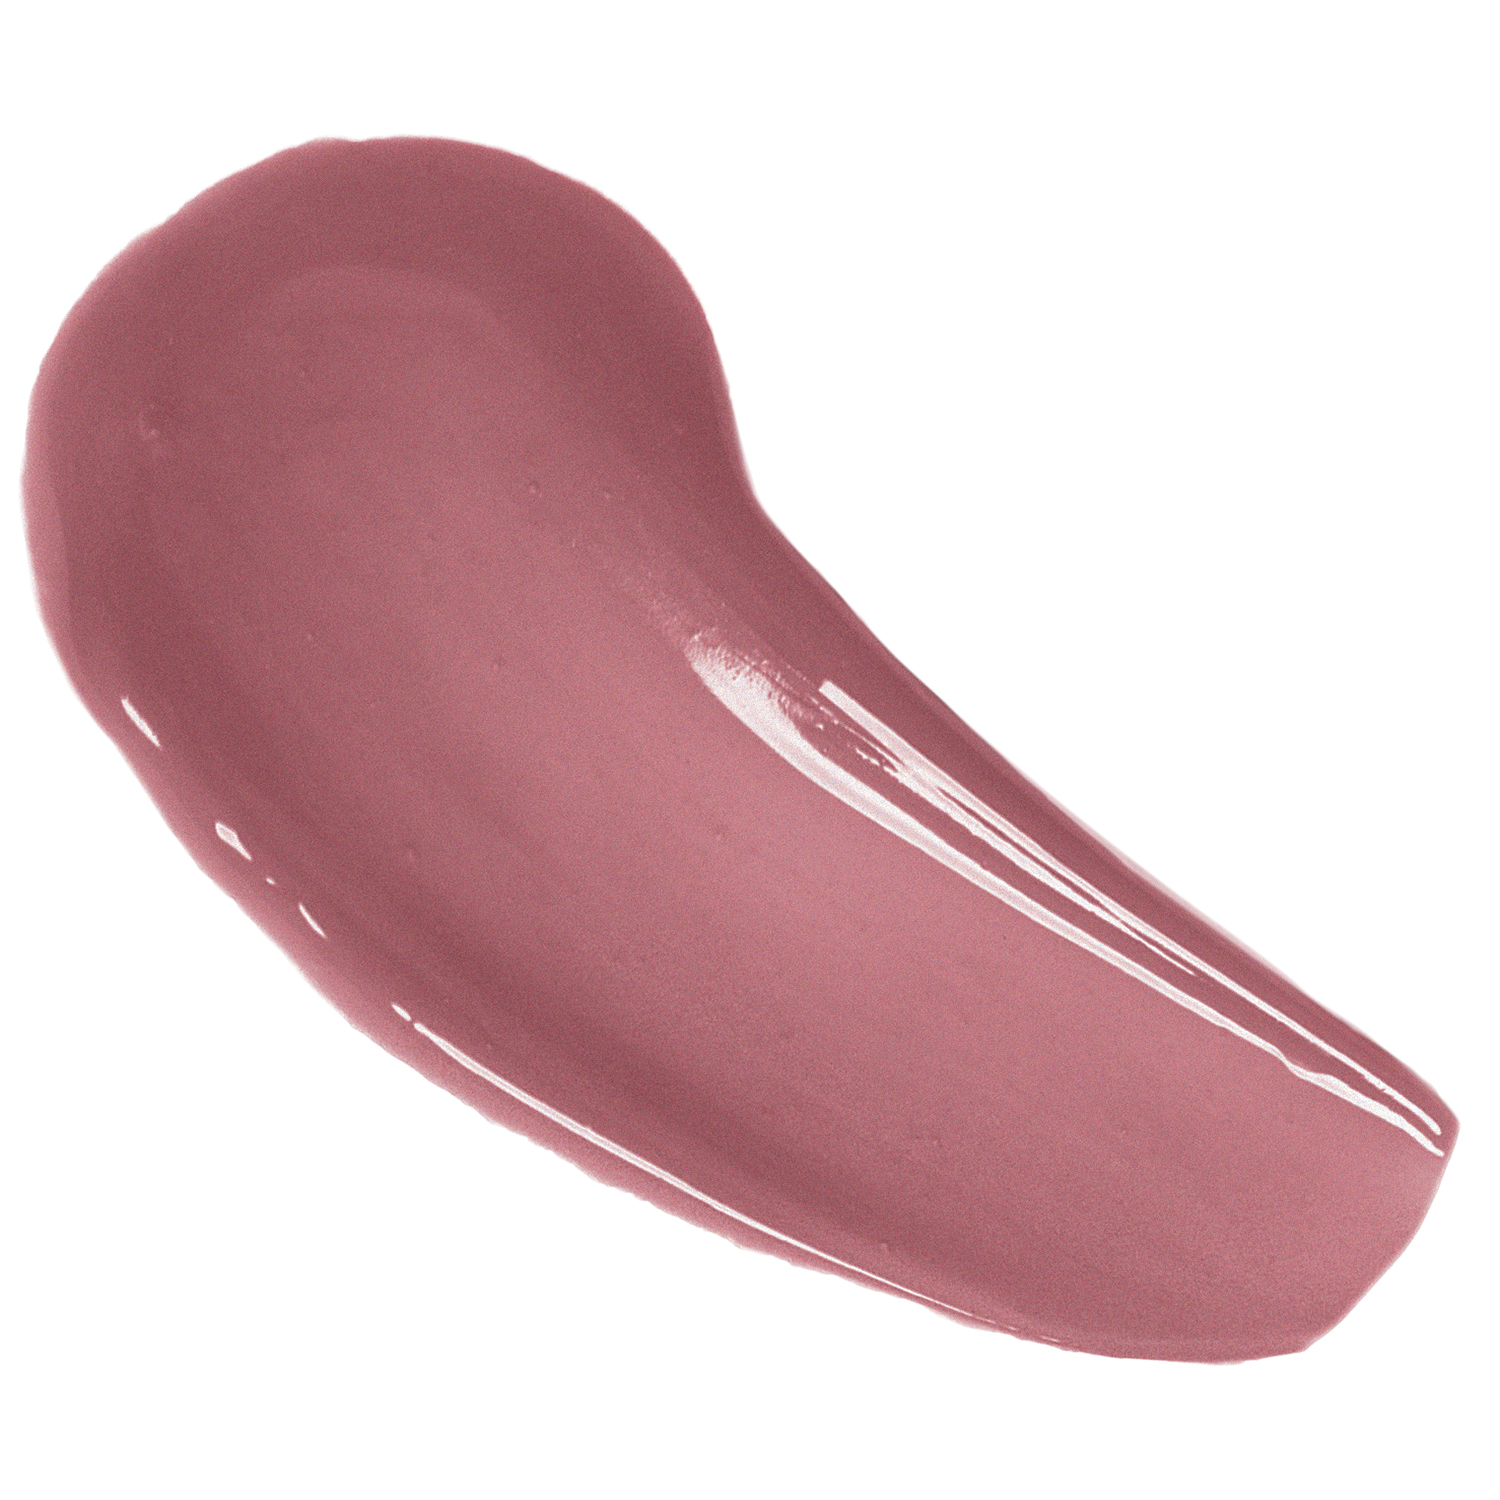 L'Oreal Paris Infallible 8 Hour Pro Hydrating Lip Gloss, Blush - image 2 of 5